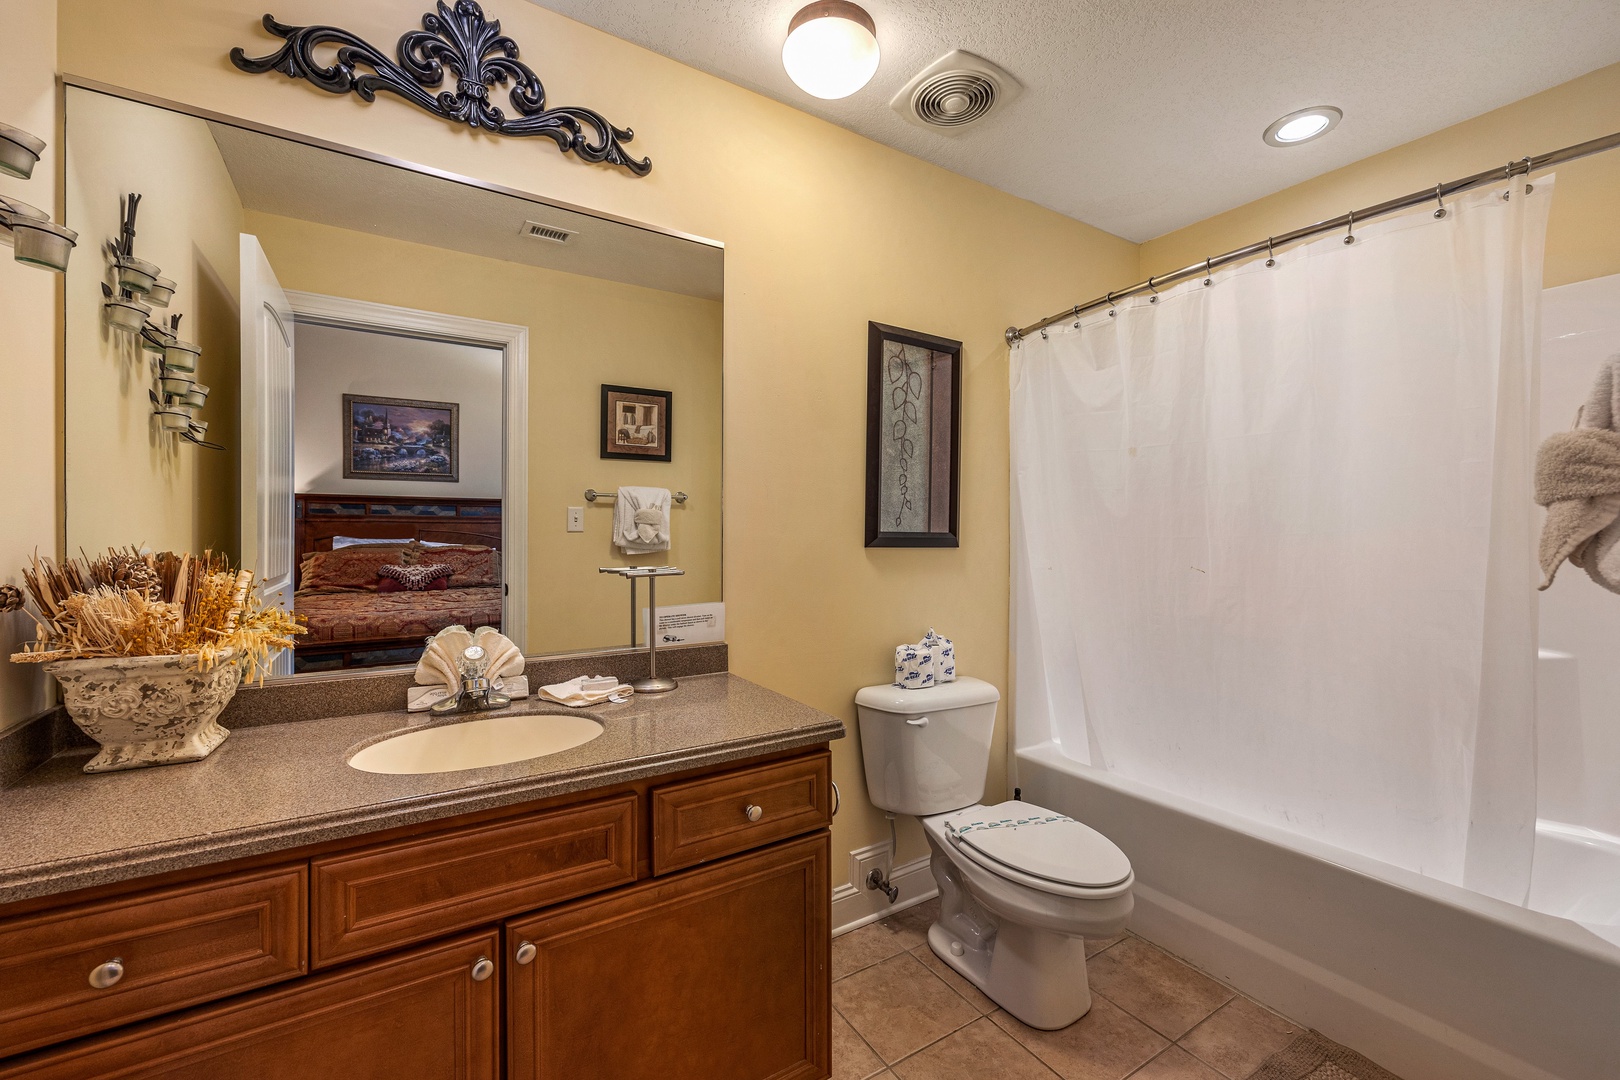 Bathroom with tub and shower at Heart of Gatlinburg, a 2 bedroom cabin rental located in Gatlinburg